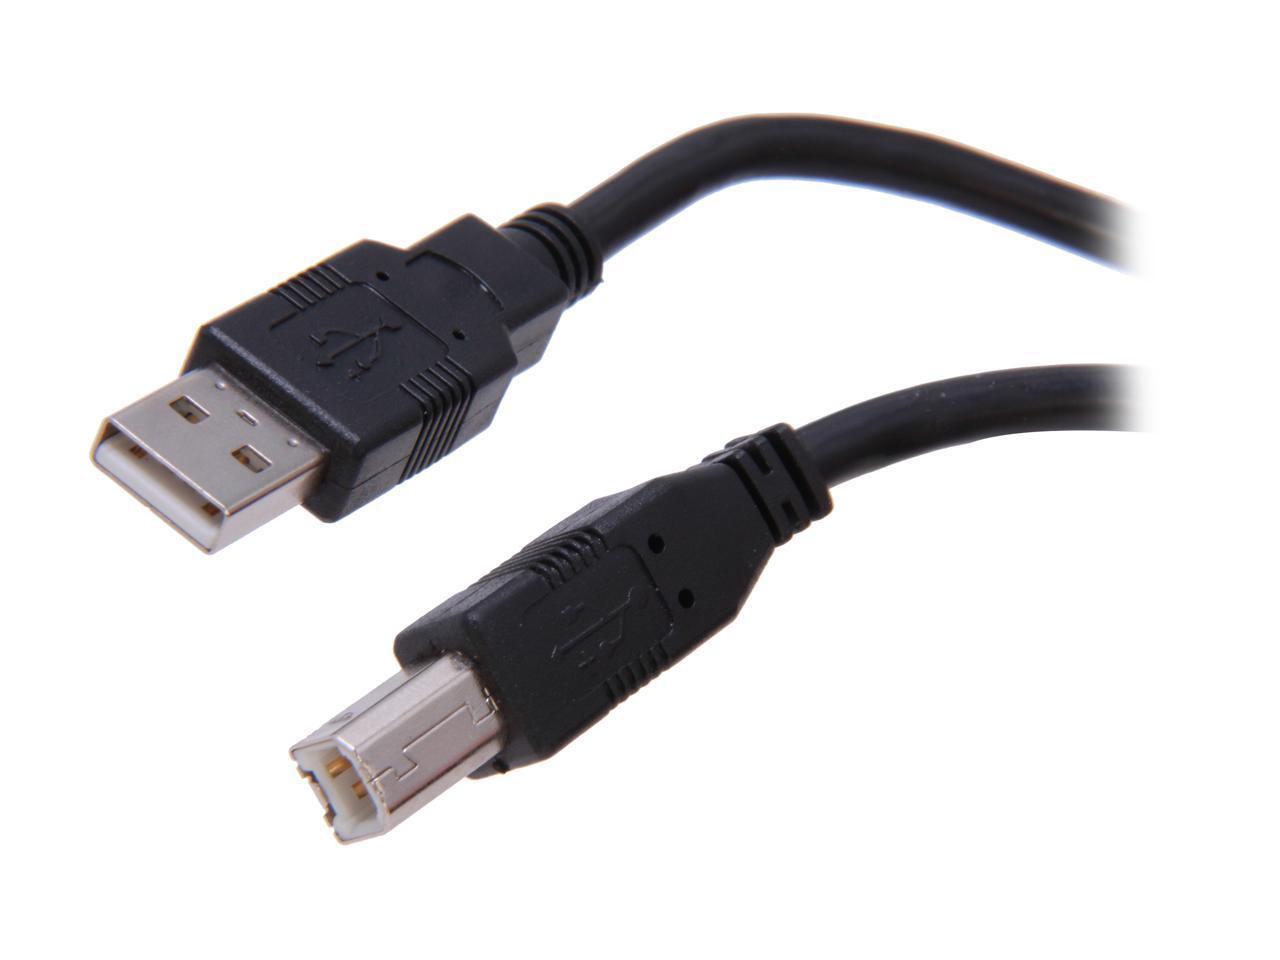 Primary image for StarTech.com USB2HAB30AC 9m/30ft Active 2.0 USB A to B Cable - M/M - Black